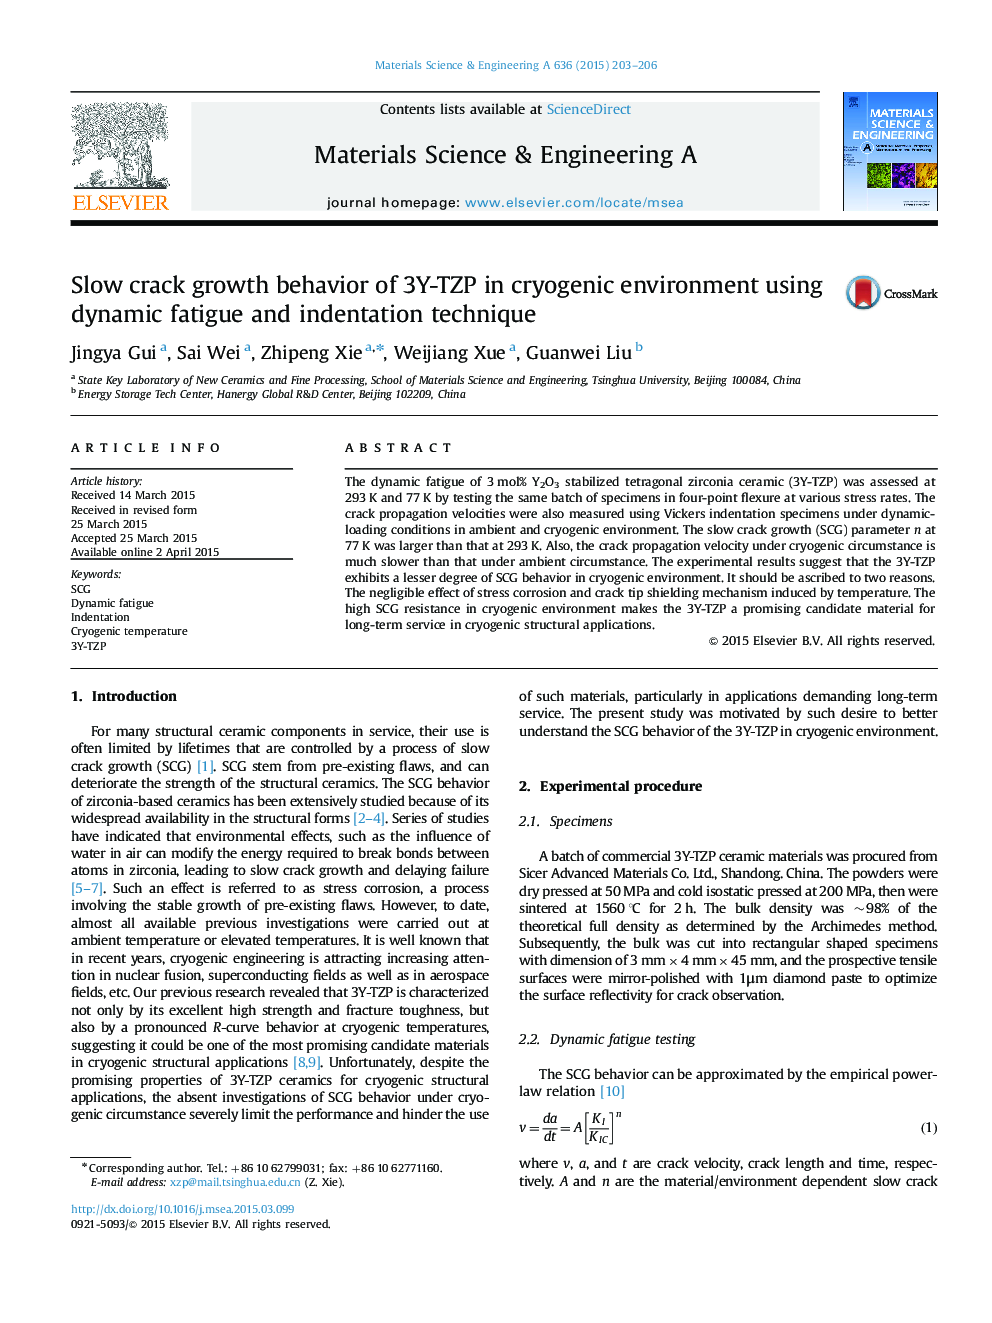 Slow crack growth behavior of 3Y-TZP in cryogenic environment using dynamic fatigue and indentation technique